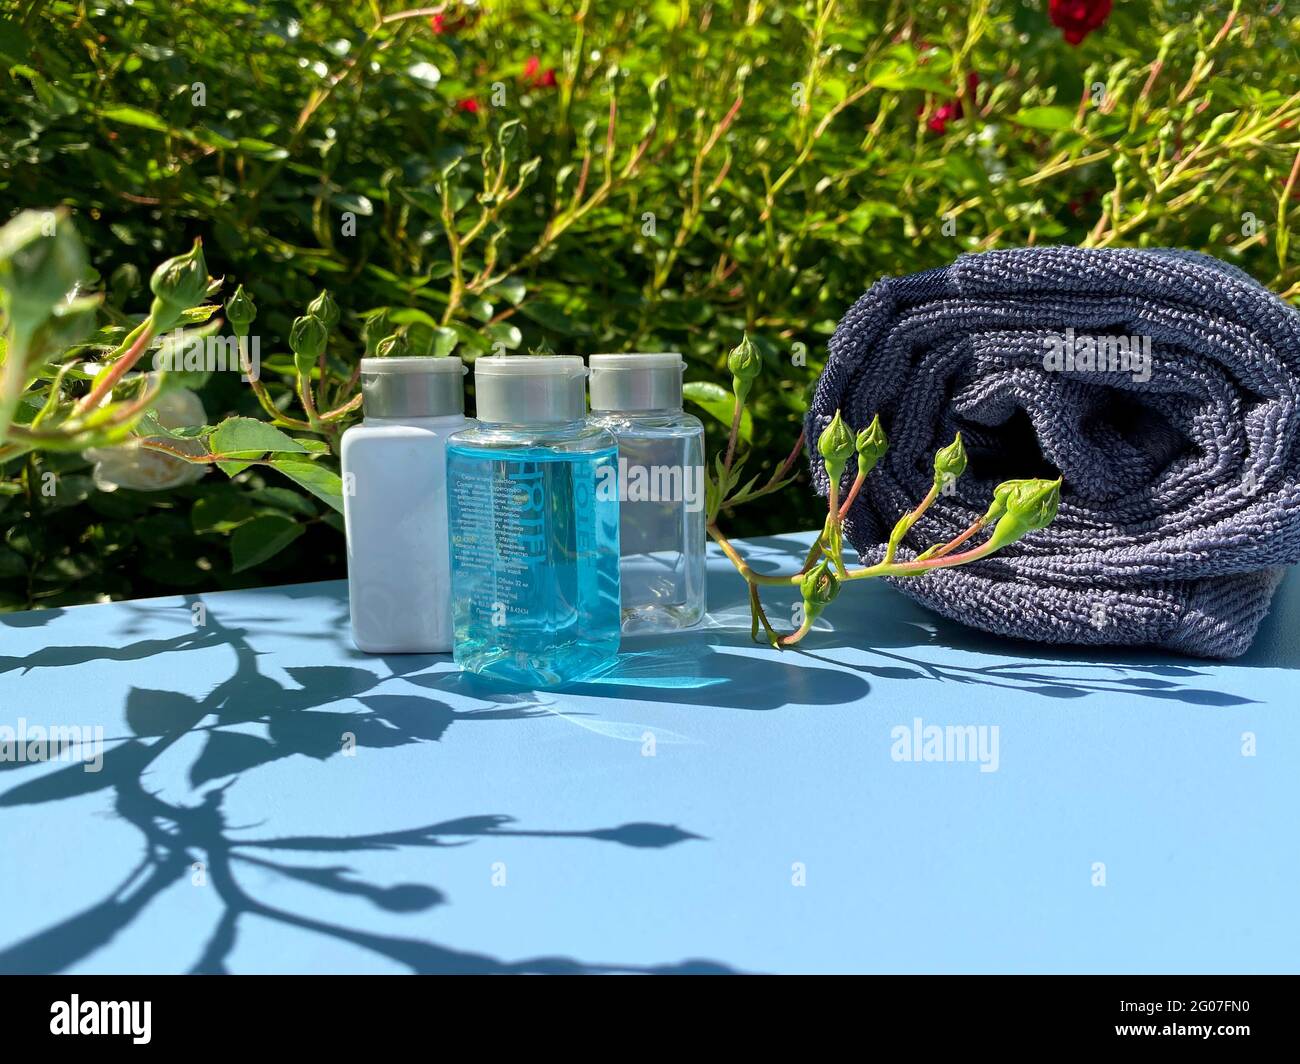 Mini bottles with cosmetic products and towel on blue background with leaves and shadows. Hotel amenities SPA and TRAVEL concept. Stock Photo